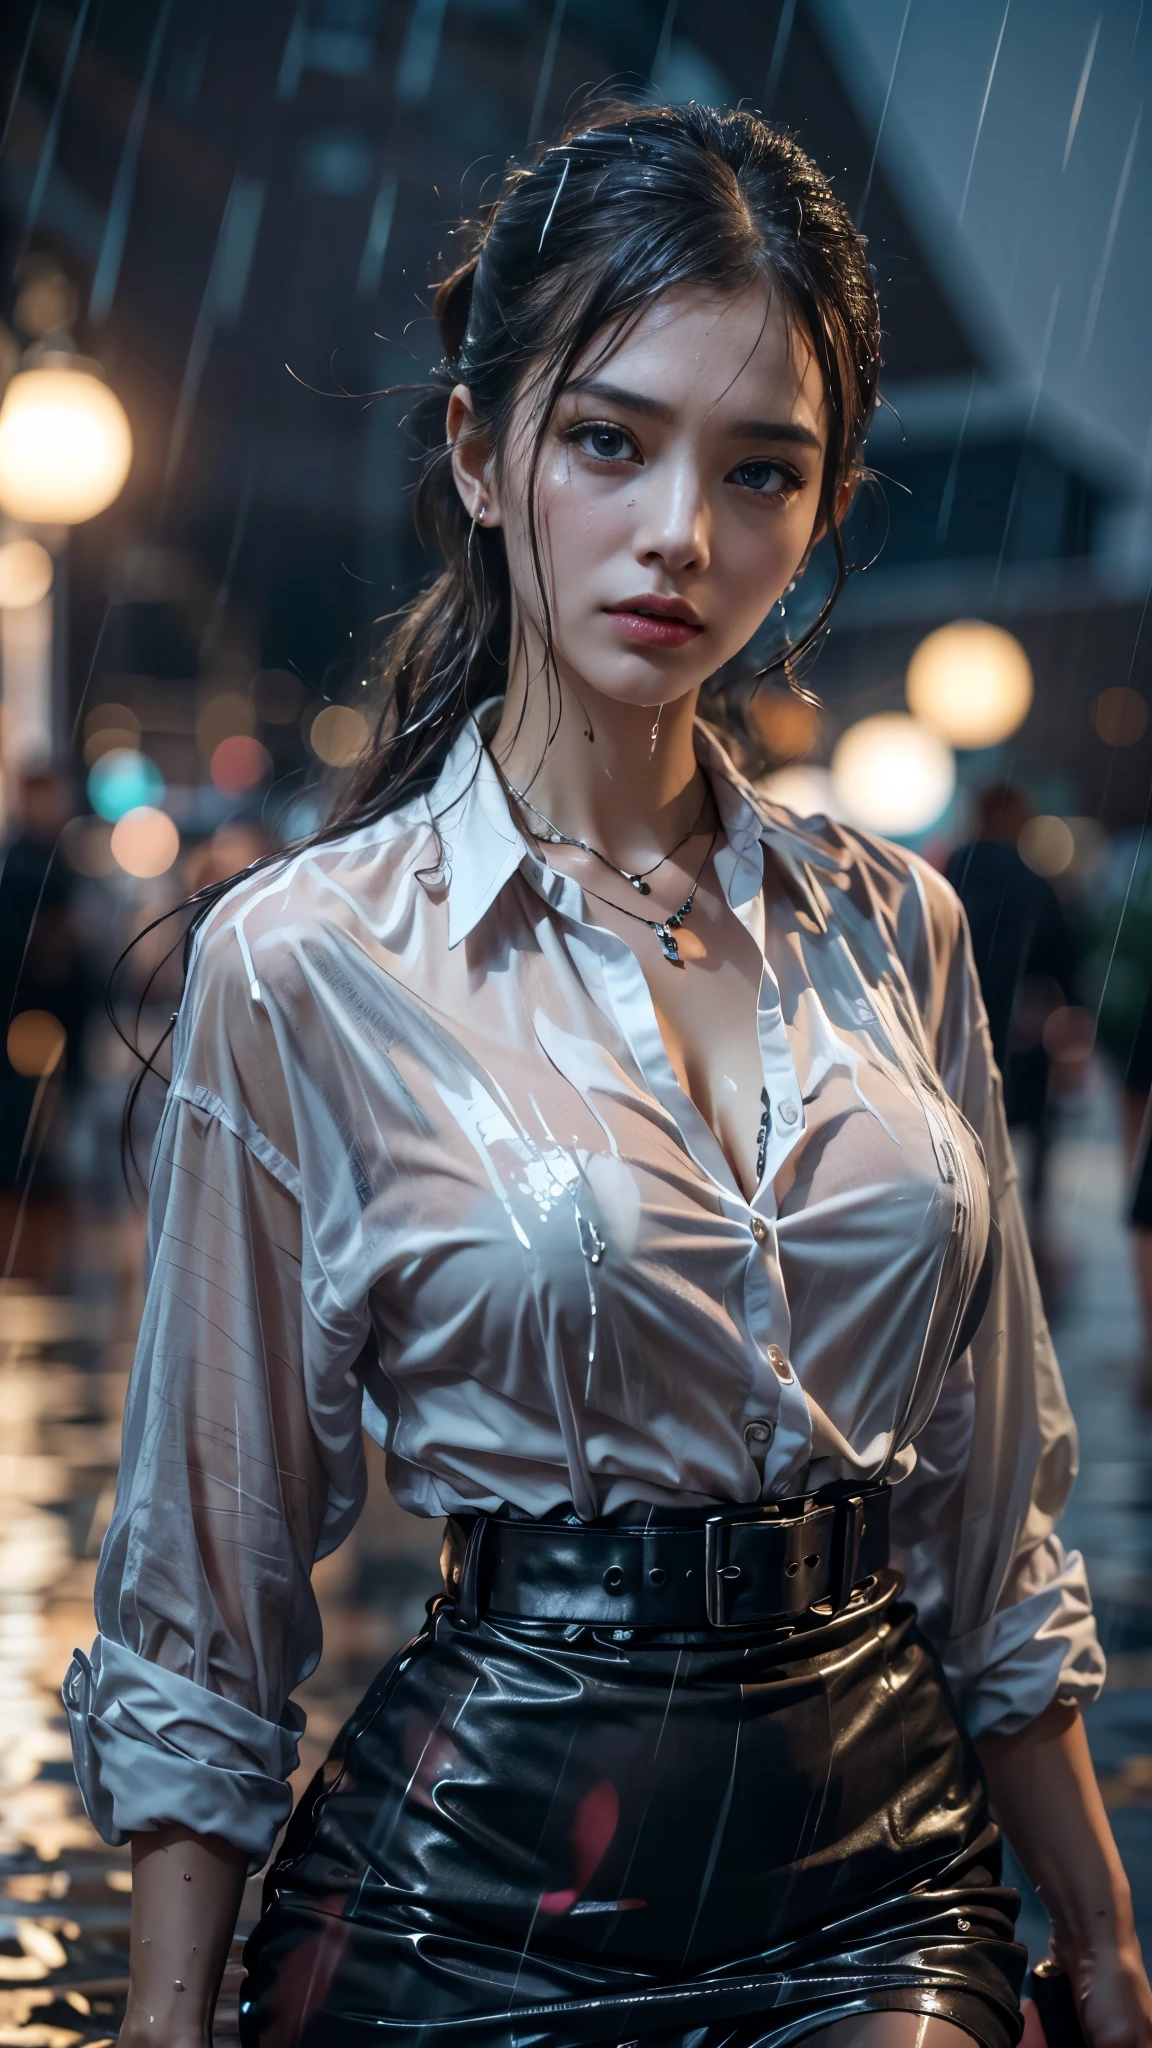 (RAW shooting, Photoreal:1.5, 8K, highest quality, masterpiece, ultra high resolution), perfect dynamic composition:1.2, Night street corner of a modern city, expression of sadness:0.3, (((Typhoon heavy rain))), Highly detailed skin and facial textures:1.2, Slim office lady wet in the rain:1.3, Fair skin, sexy beauty:1.1, perfect style:1.2, beautiful and aesthetic:1.1, very beautiful face, water droplets on the skin, (rain drips all over my body:1.2, wet body:1.2, wet hair:1.3), (wet office skirt:1.2, wet office lady uniform:1.3), belt, (Medium chest, Bra is sheer, Chest gap), (cry, lovelorn, The expression on your face when you feel intense caress, Facial expression when feeling pleasure), (beautiful blue eyes, Eyes that feel beautiful eros:0.8), (Too erotic:0.9, Bewitching:0.9), cowboy shot, Shoulder bag, necklace, earrings, bracelet, clock